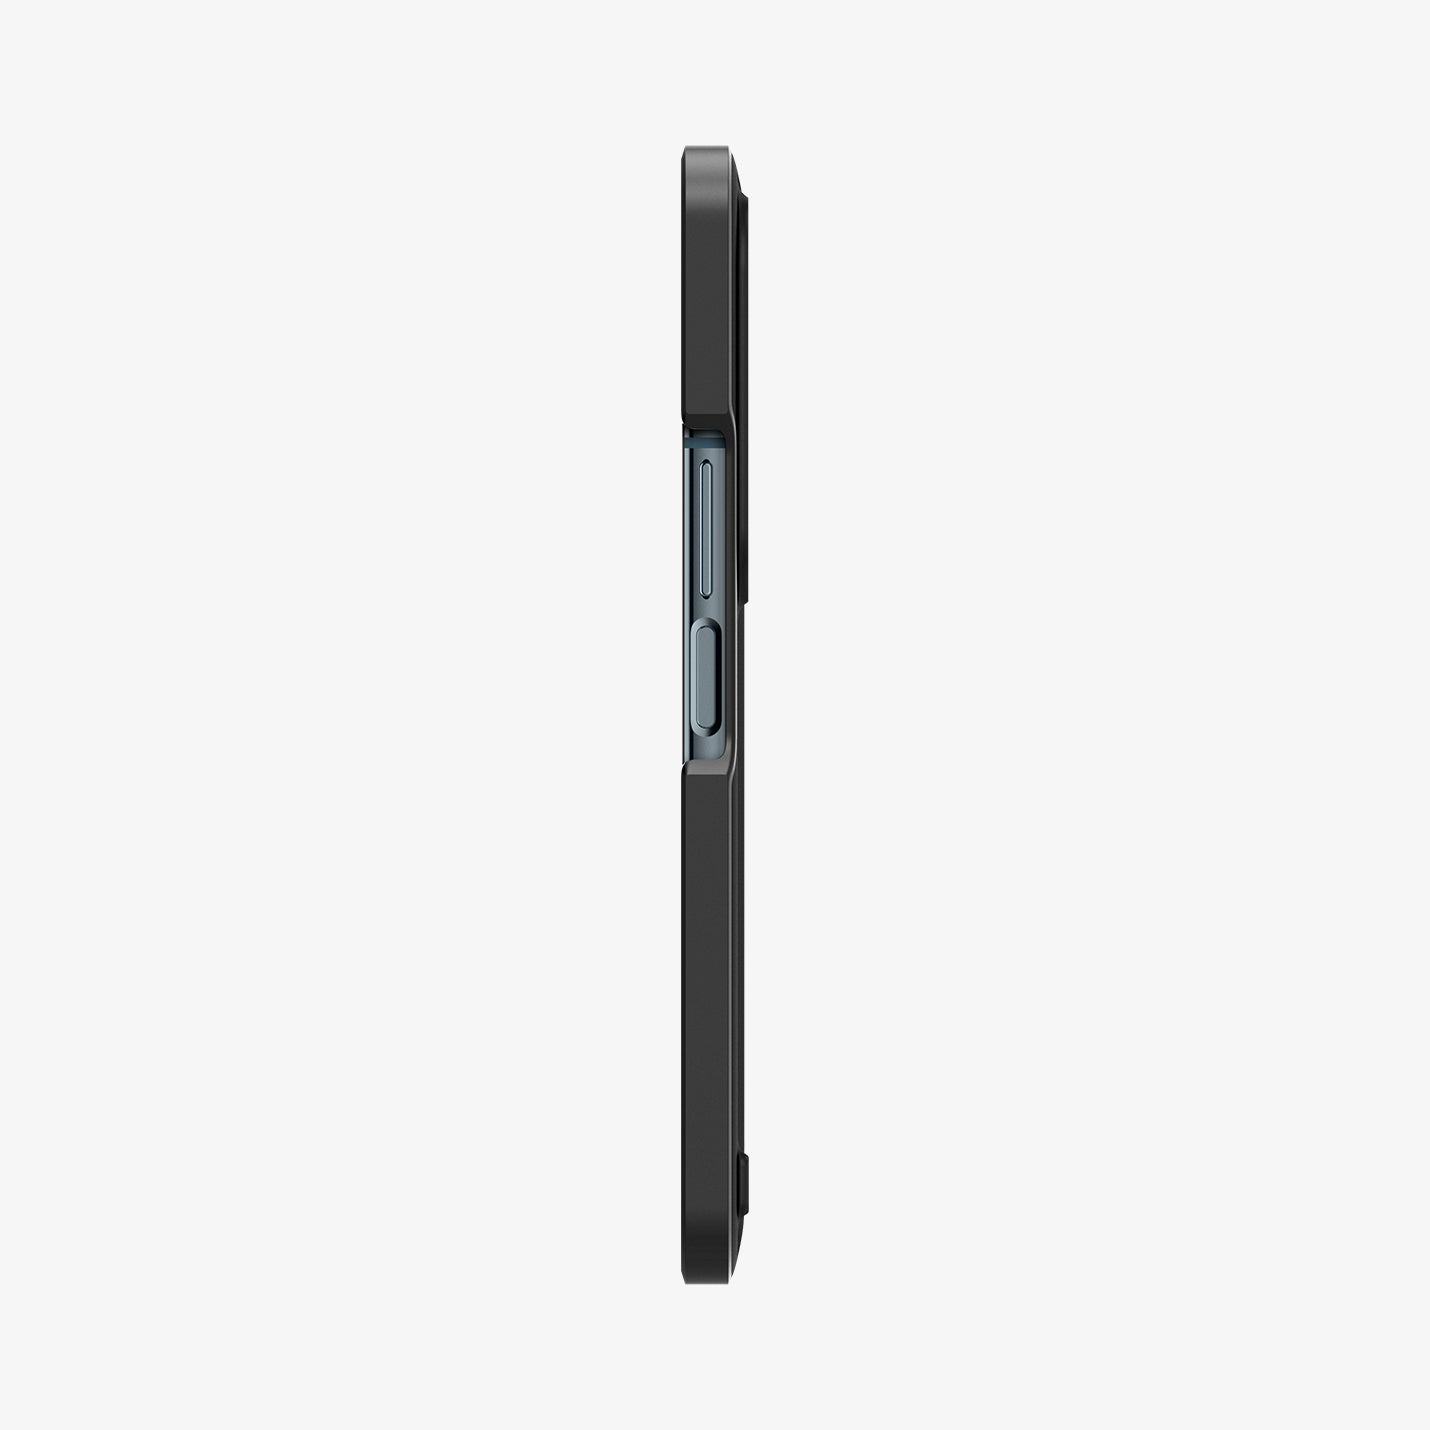 ACS05099 - Galaxy Z Fold 4 Case Thin Fit P in black showing the side with volume controls